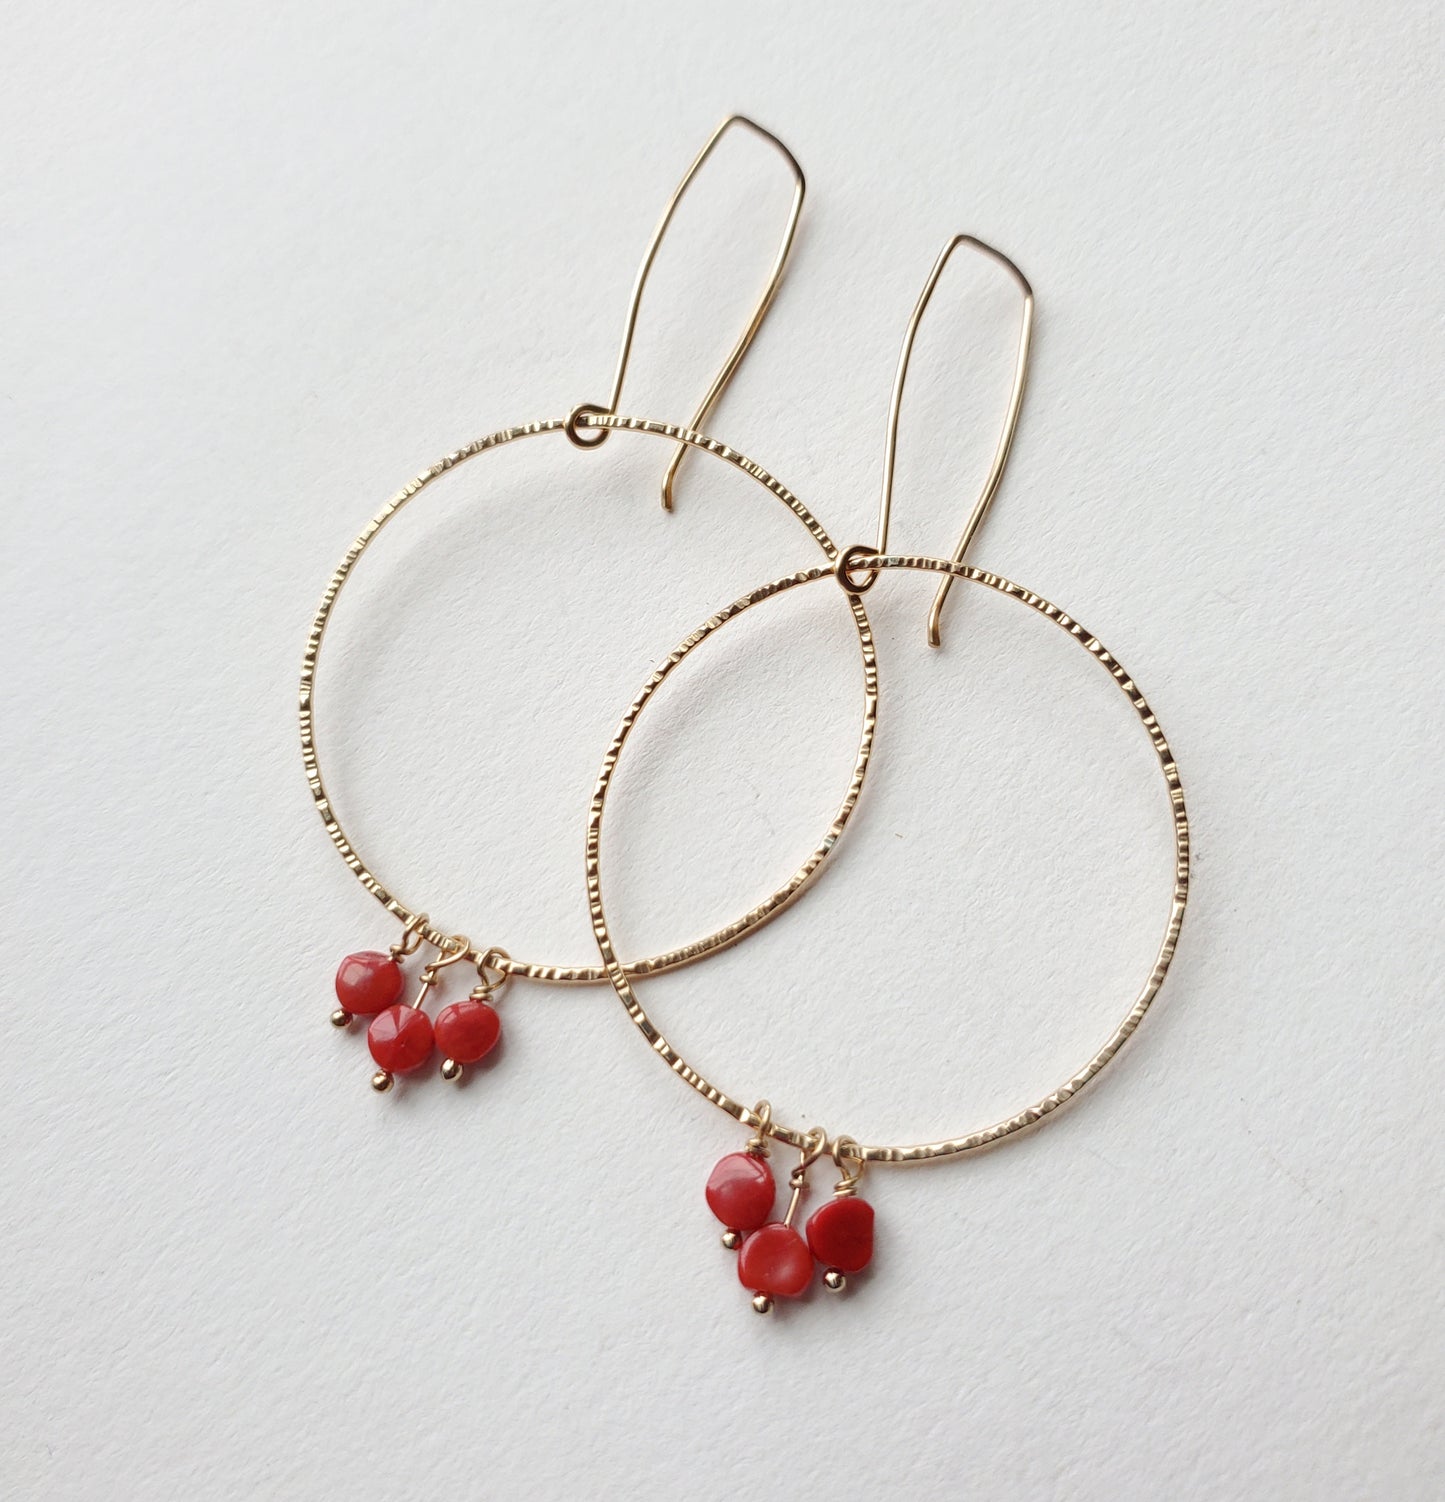 New Moon Stone Earrings - Coral